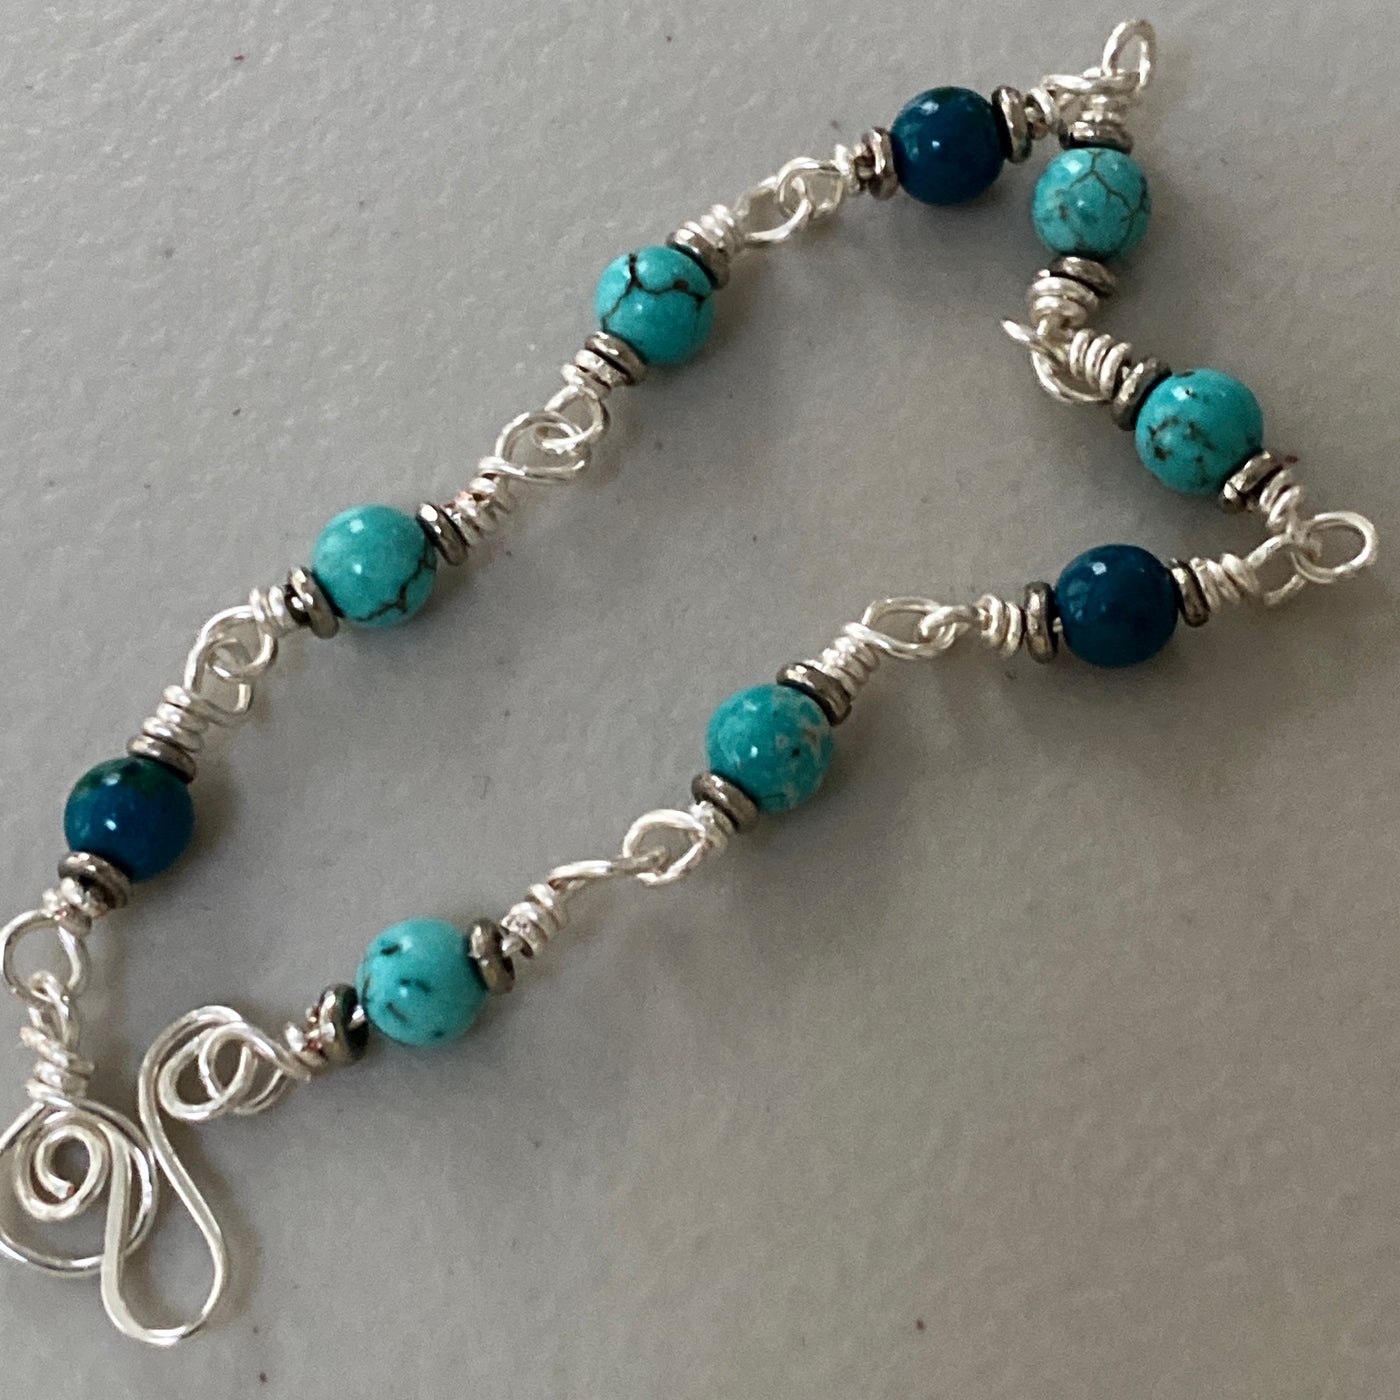 Bracelet in silver, turquoise and crysocolla